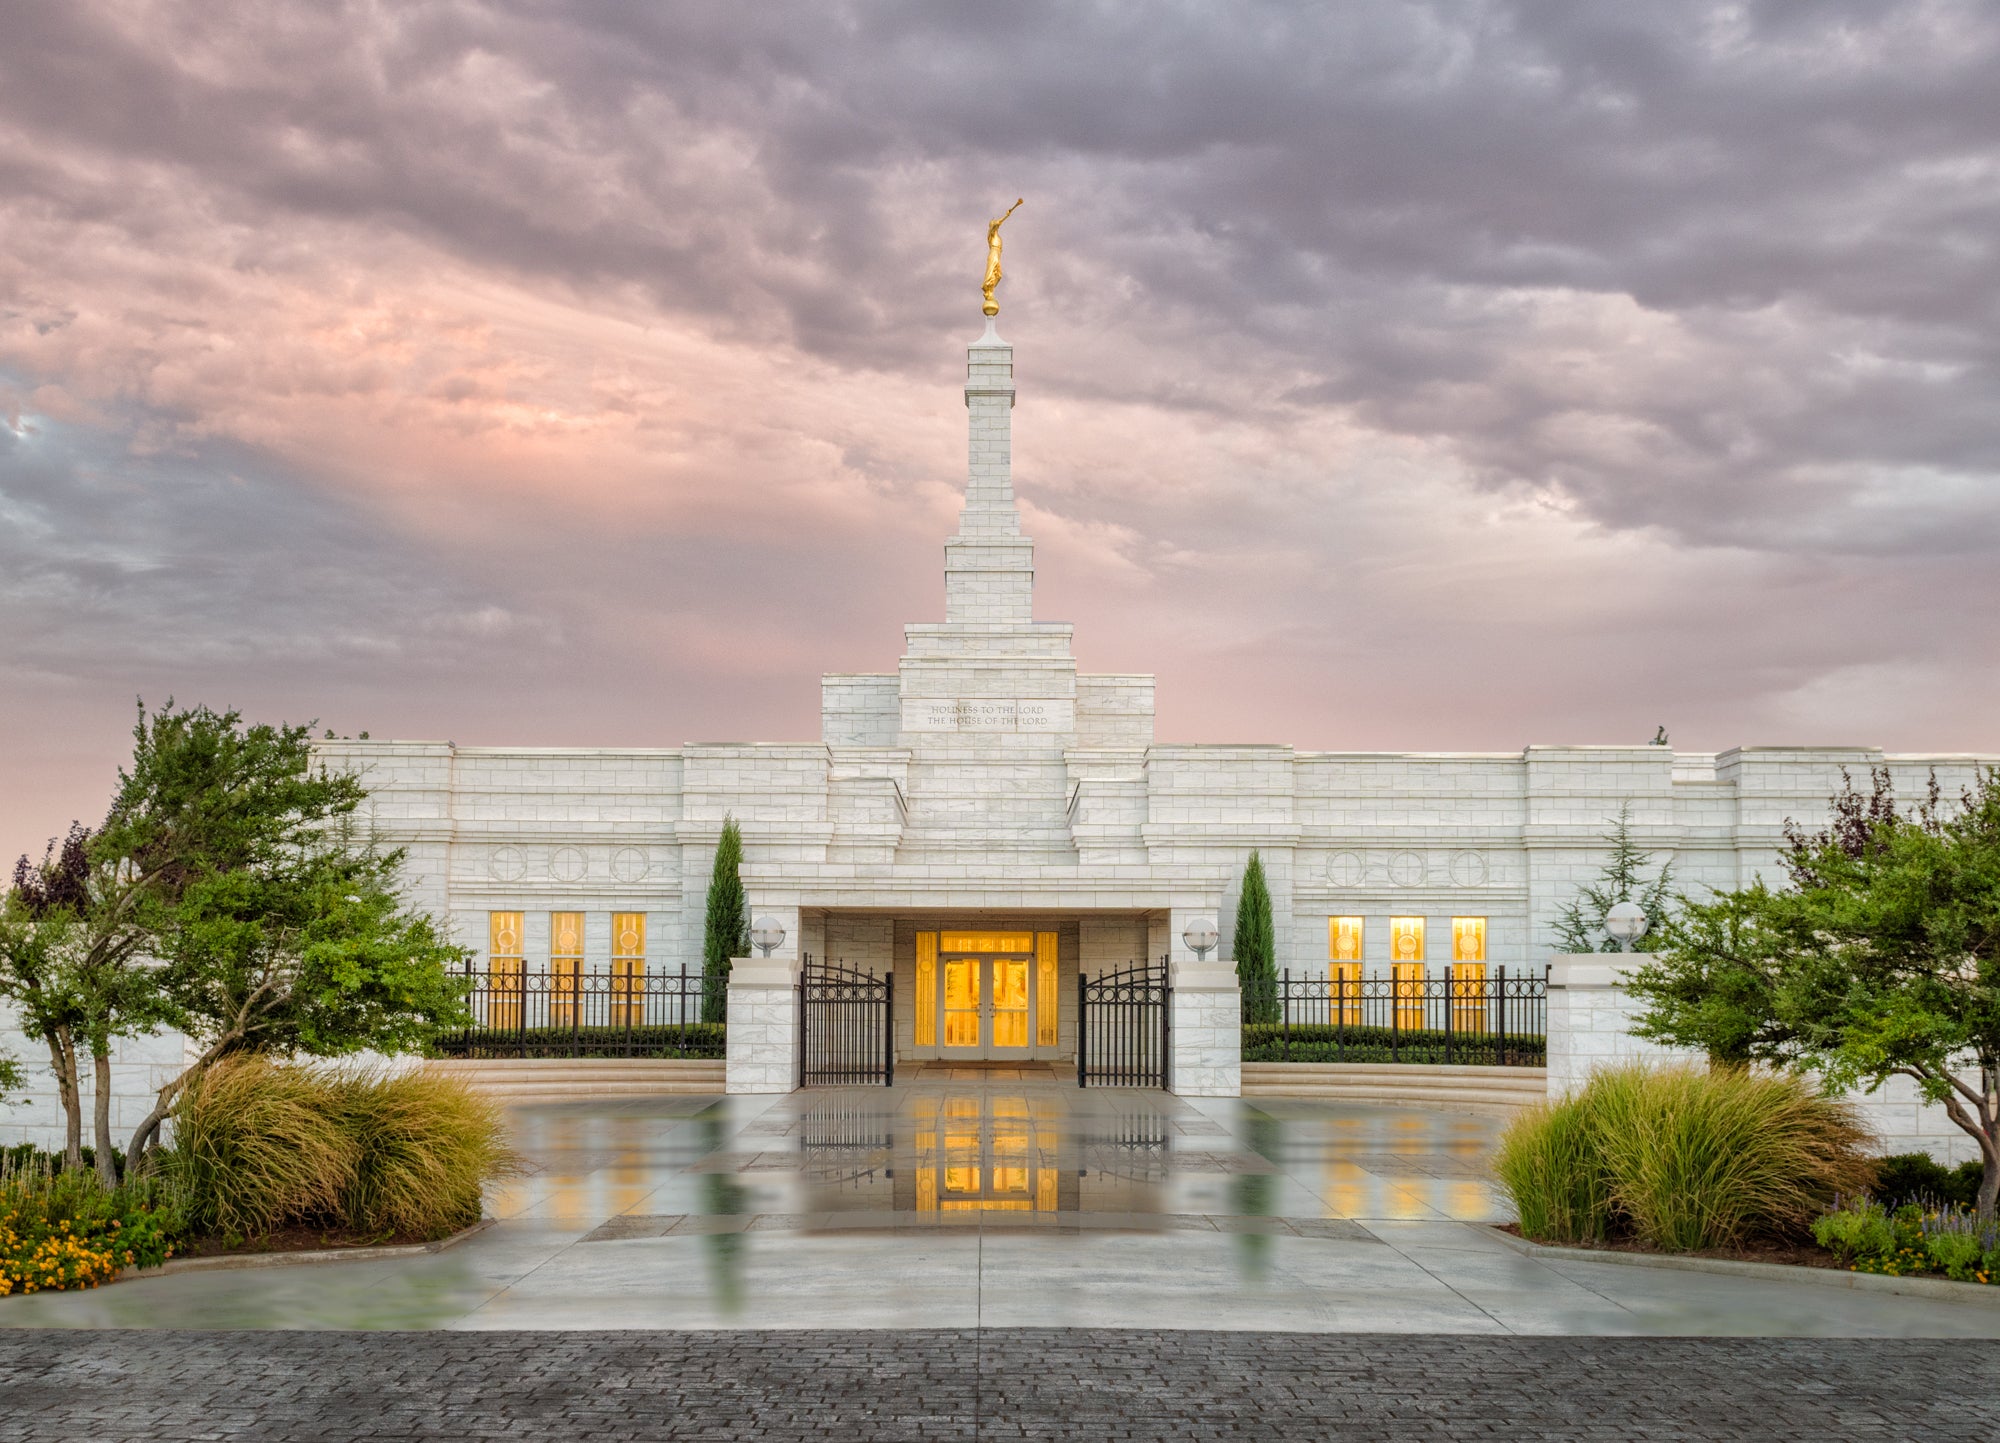 Oklahoma City Temple - Covenant Path Series by Robert A Boyd